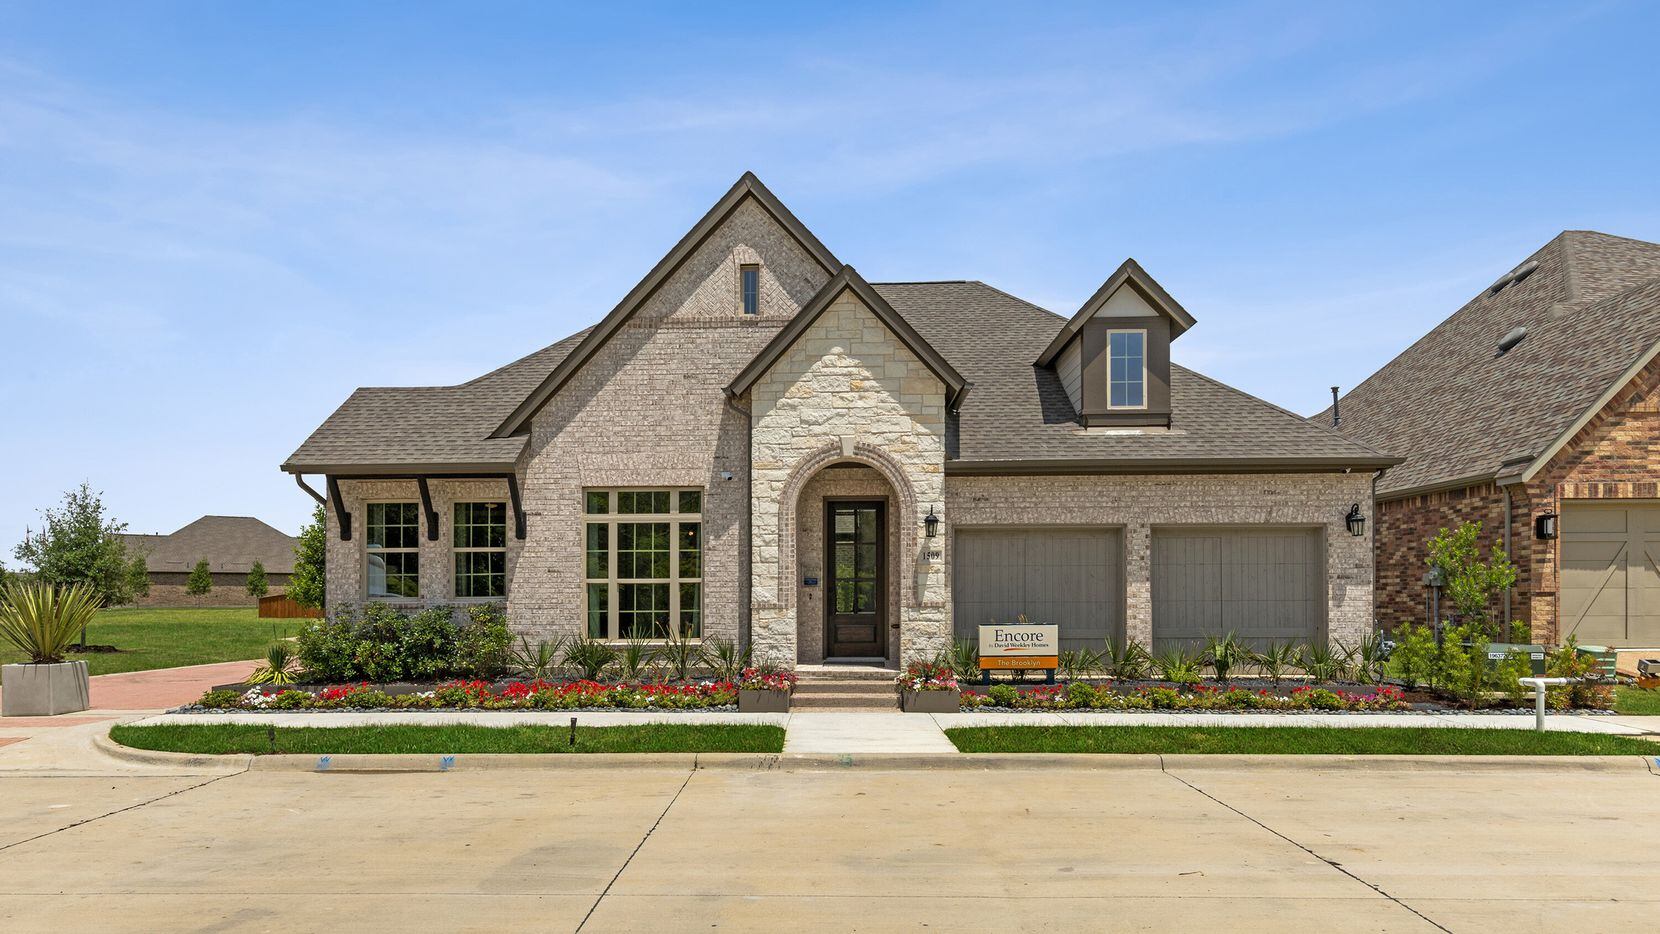 Encore by David Weekley Homes has opened a new phase of 161 lots in the Elements at Viridian...